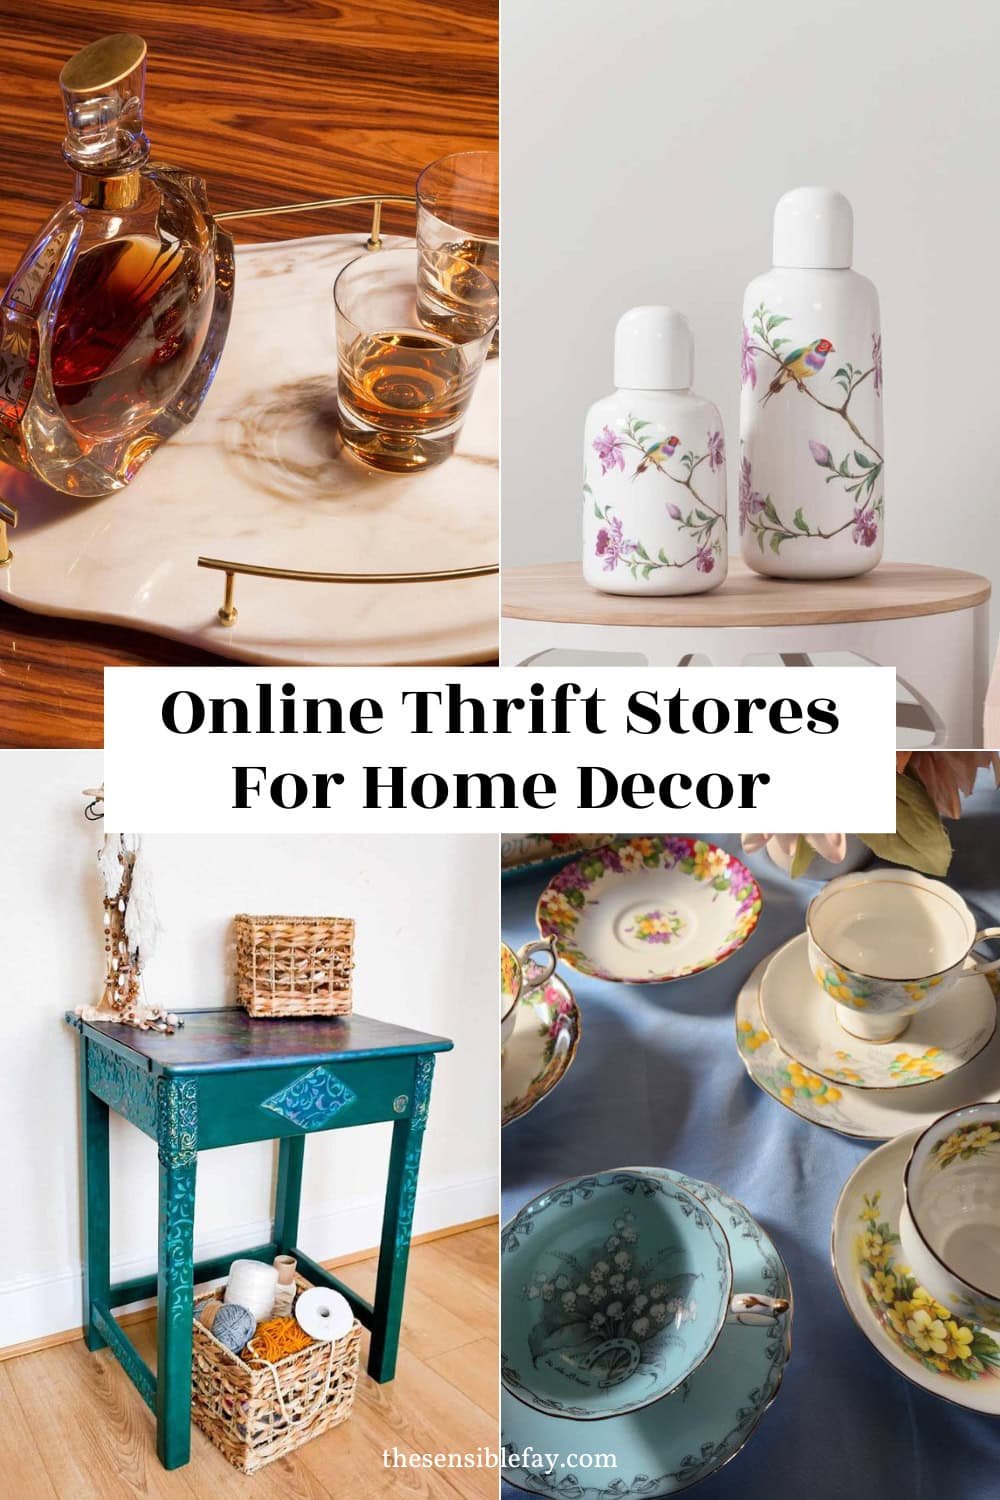 online thrift stores that sell home decor 2.jpg